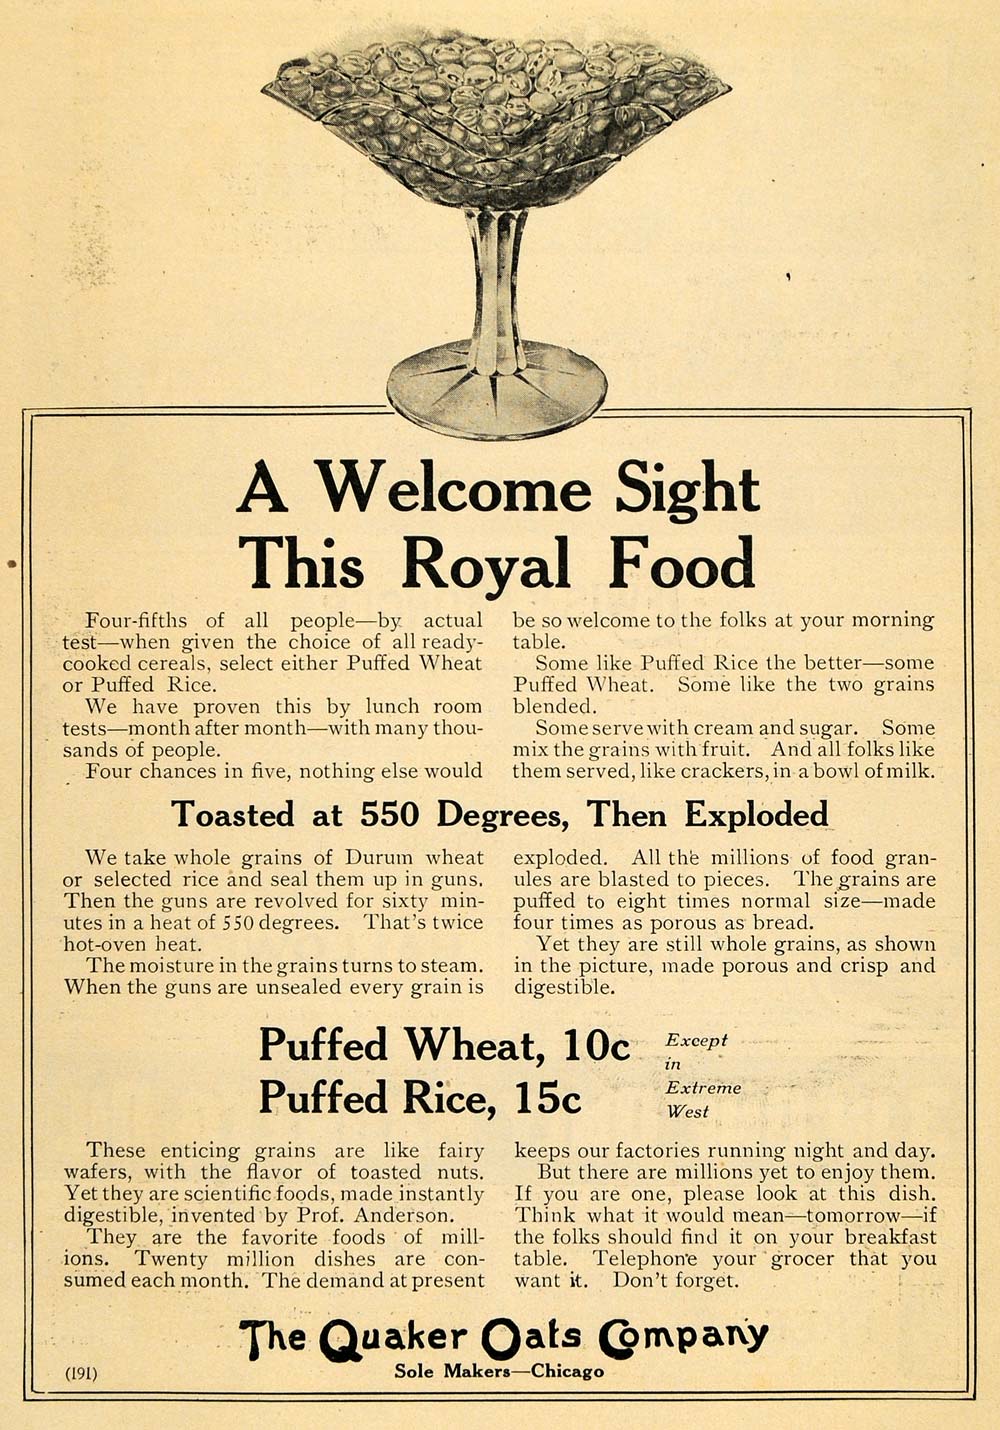 1911 Ad Quaker Oats Company Puffed Wheat Rice Cereal - ORIGINAL ADVERTISING TOM1